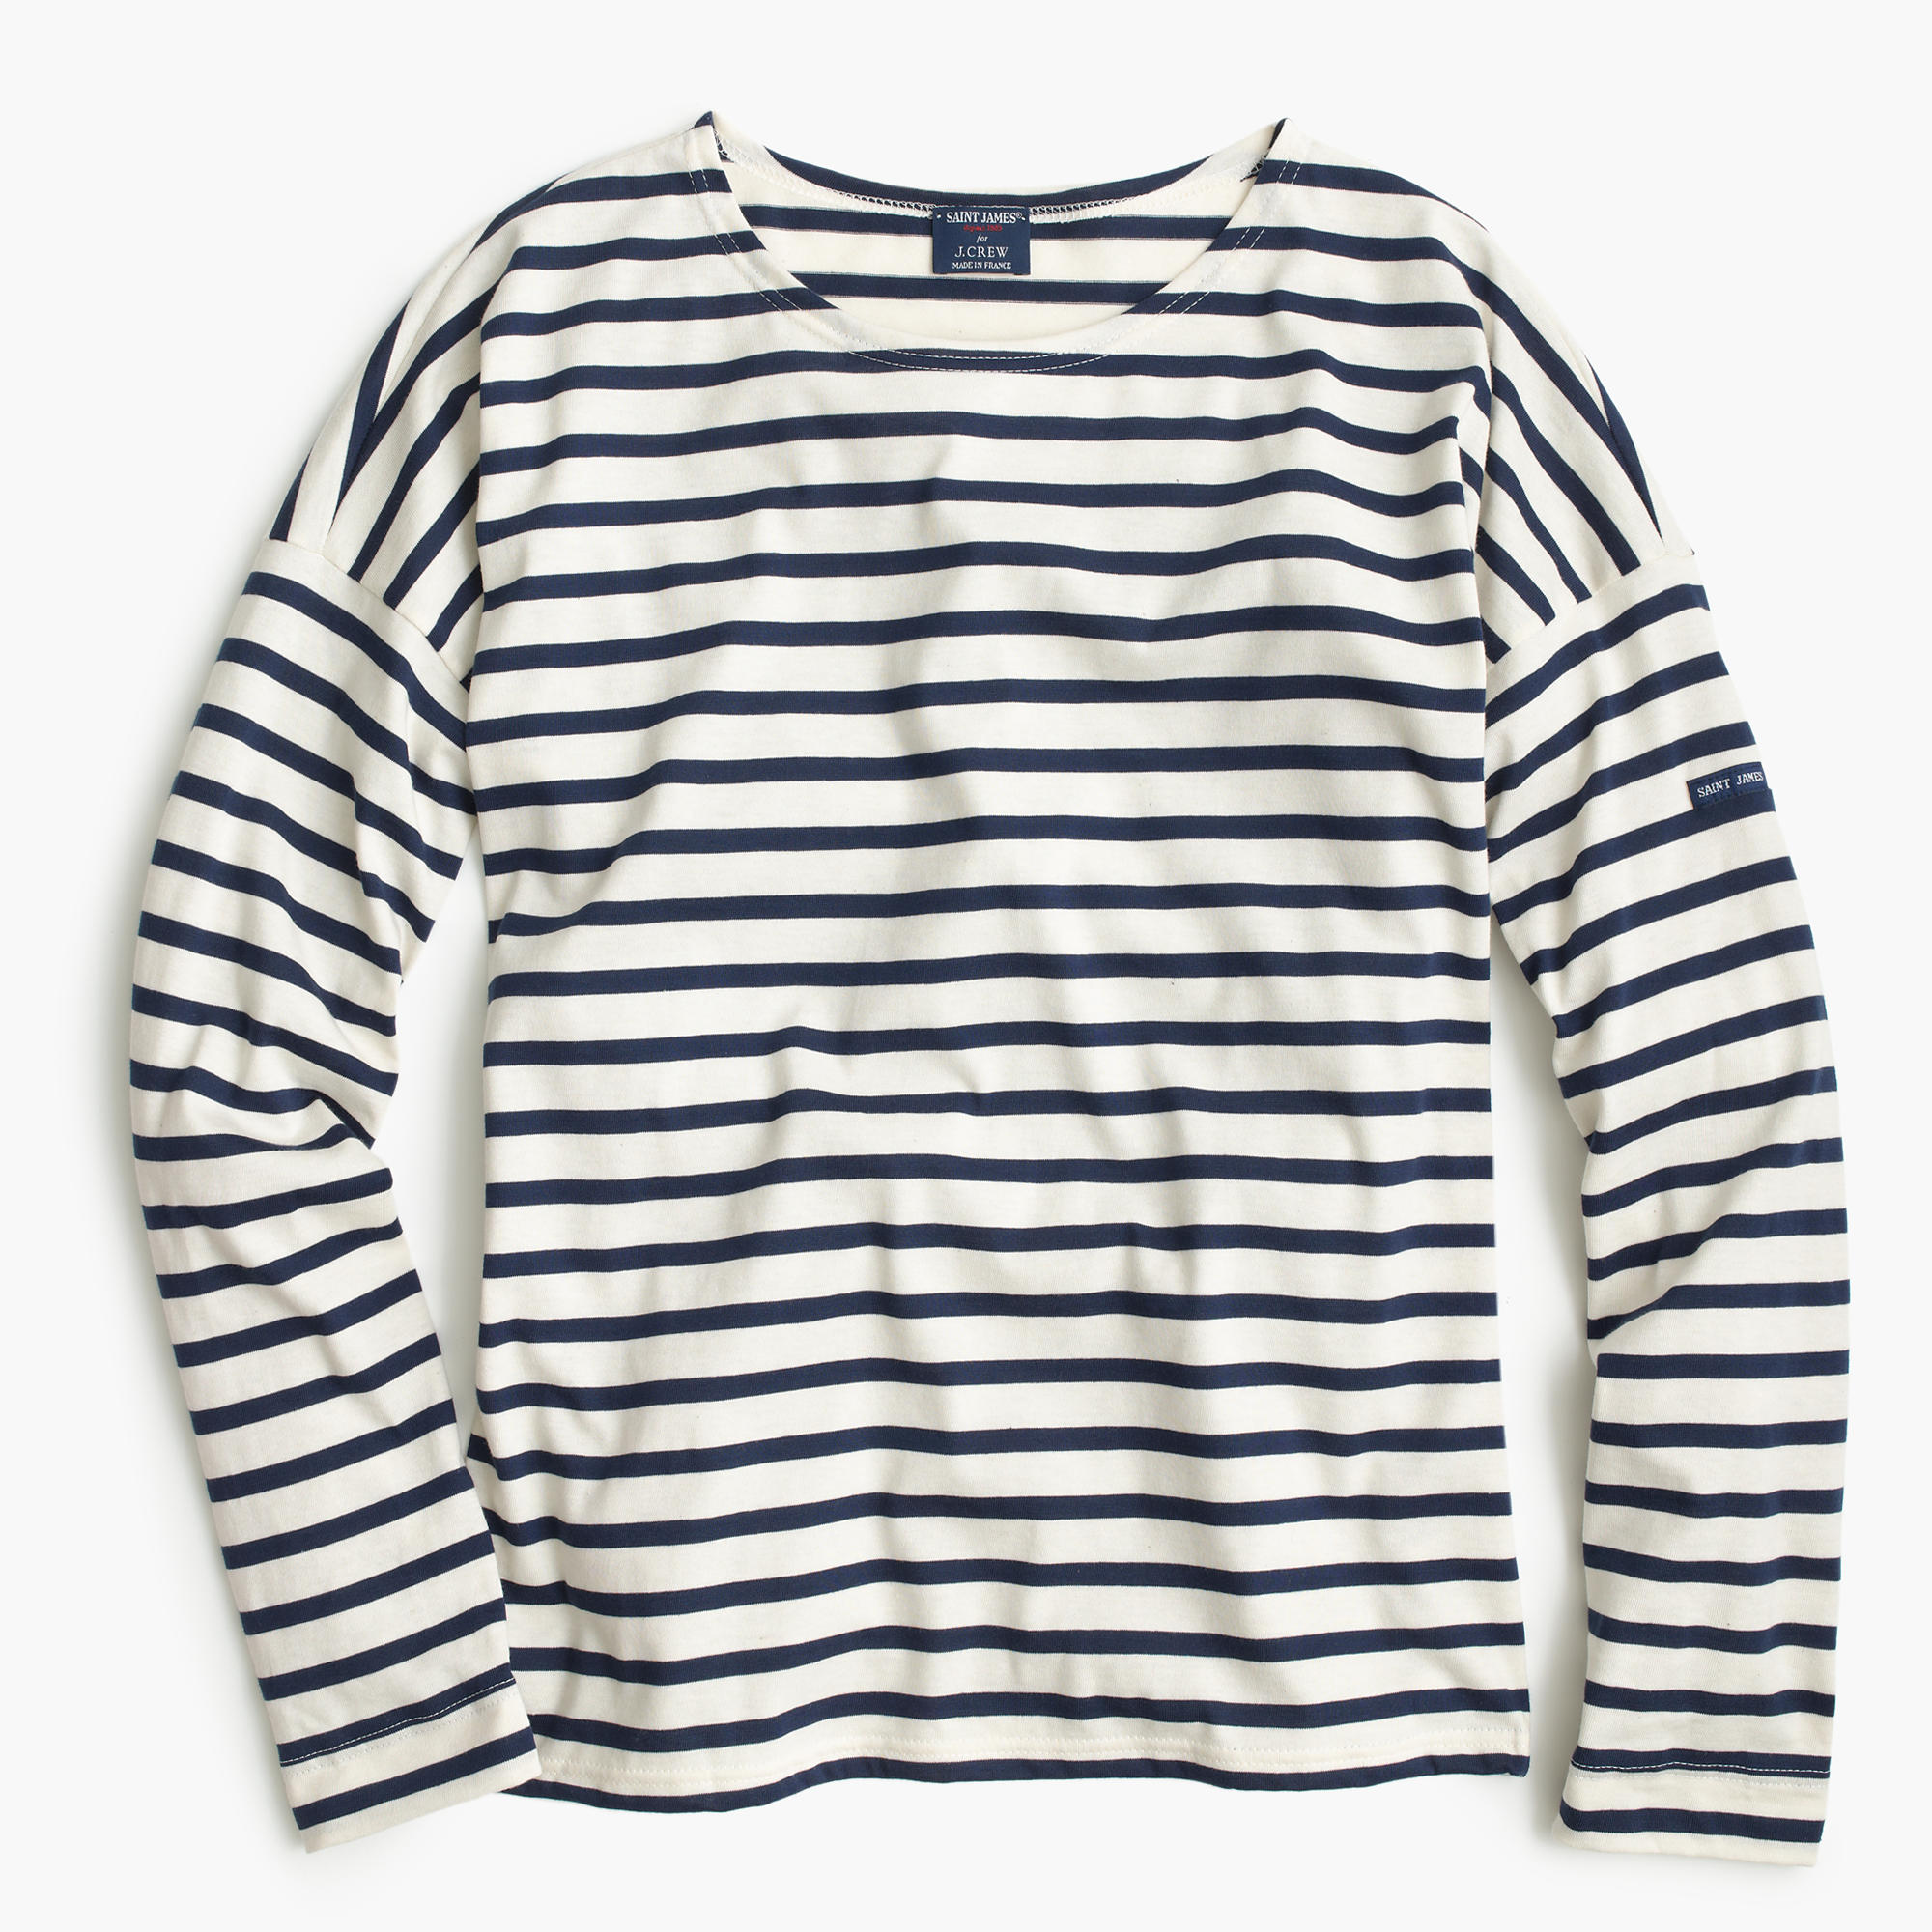   St. James x J.Crew.  Not sure about the drop shoulder, could make me look like a linebacker. 